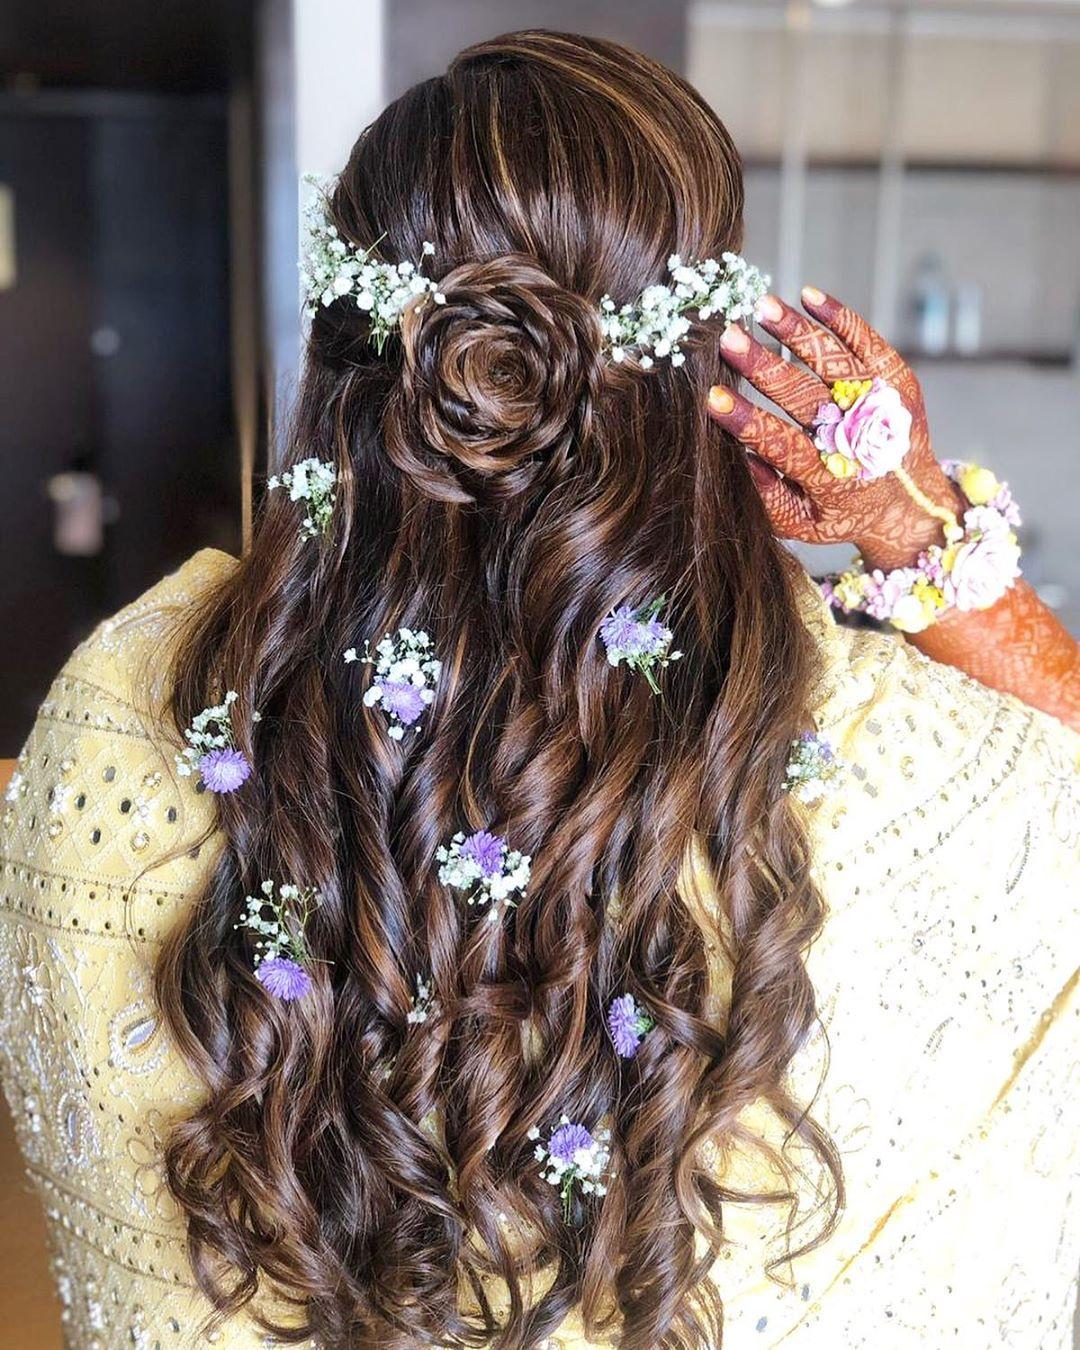 16 Dainty Baby's Breath Hairstyle Ideas for Brides & Bridesmaids